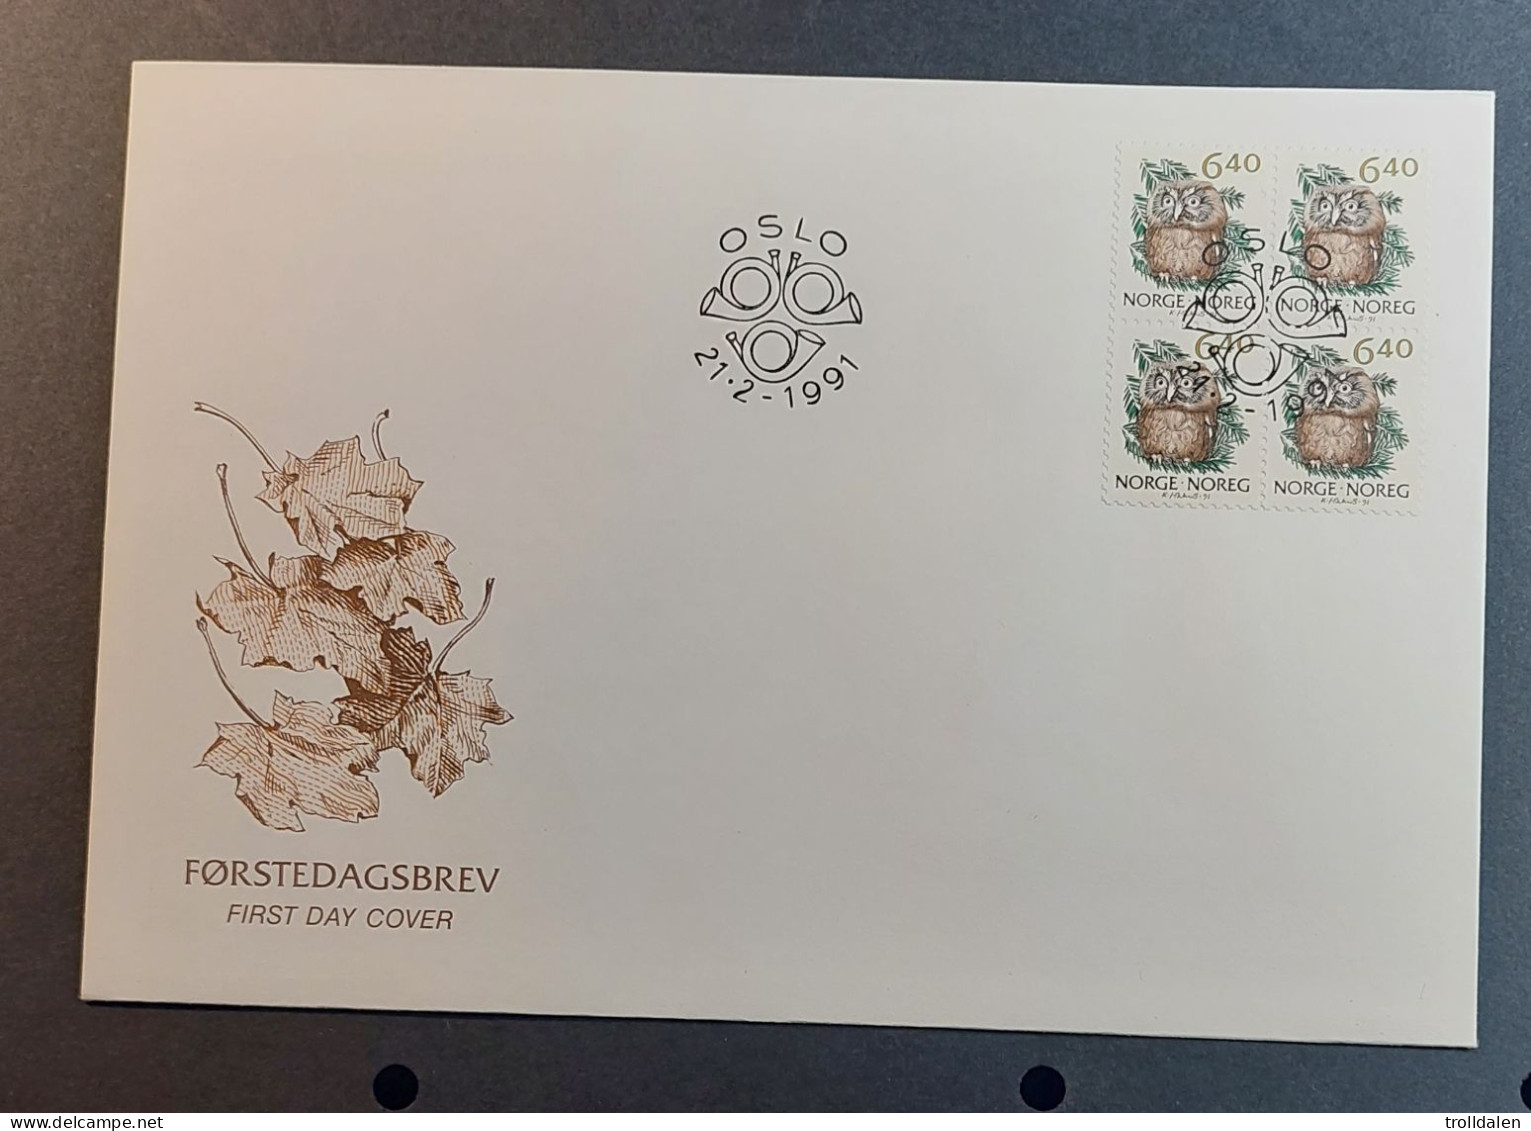 Norway FDC 1991 - FDC